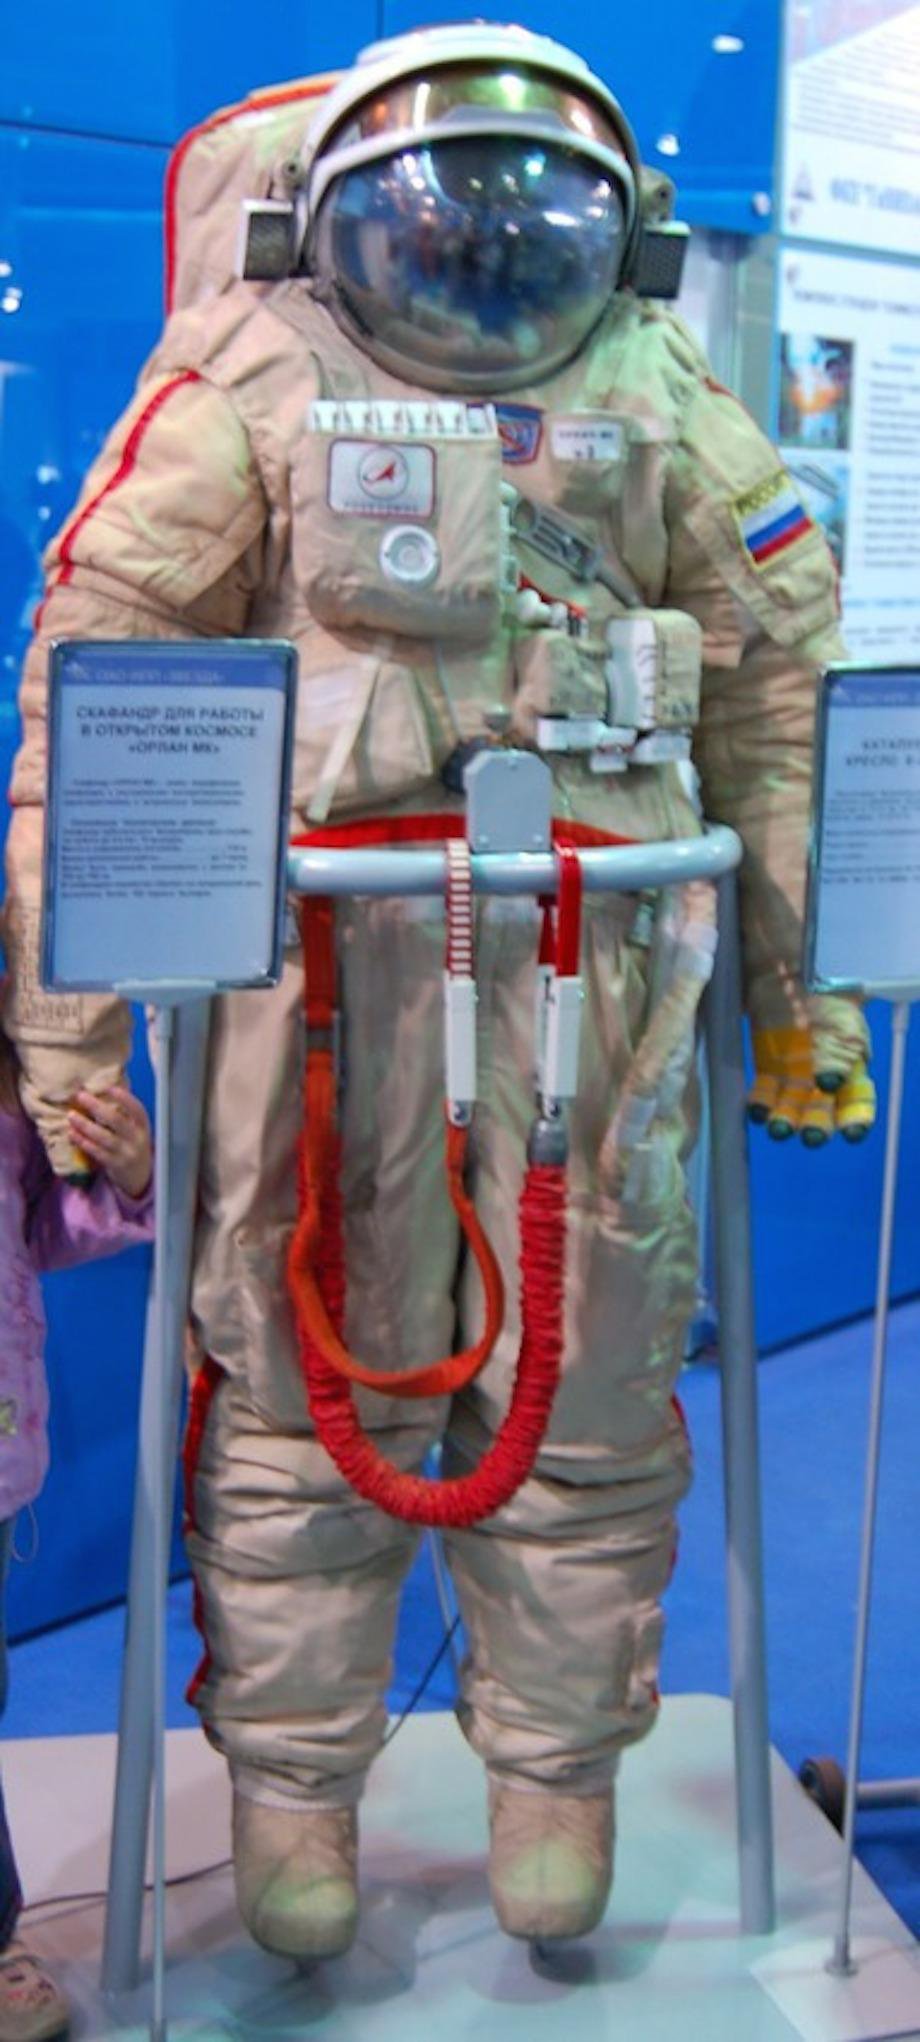 check-out-the-evolution-of-the-space-suit-41-hq-photos-28